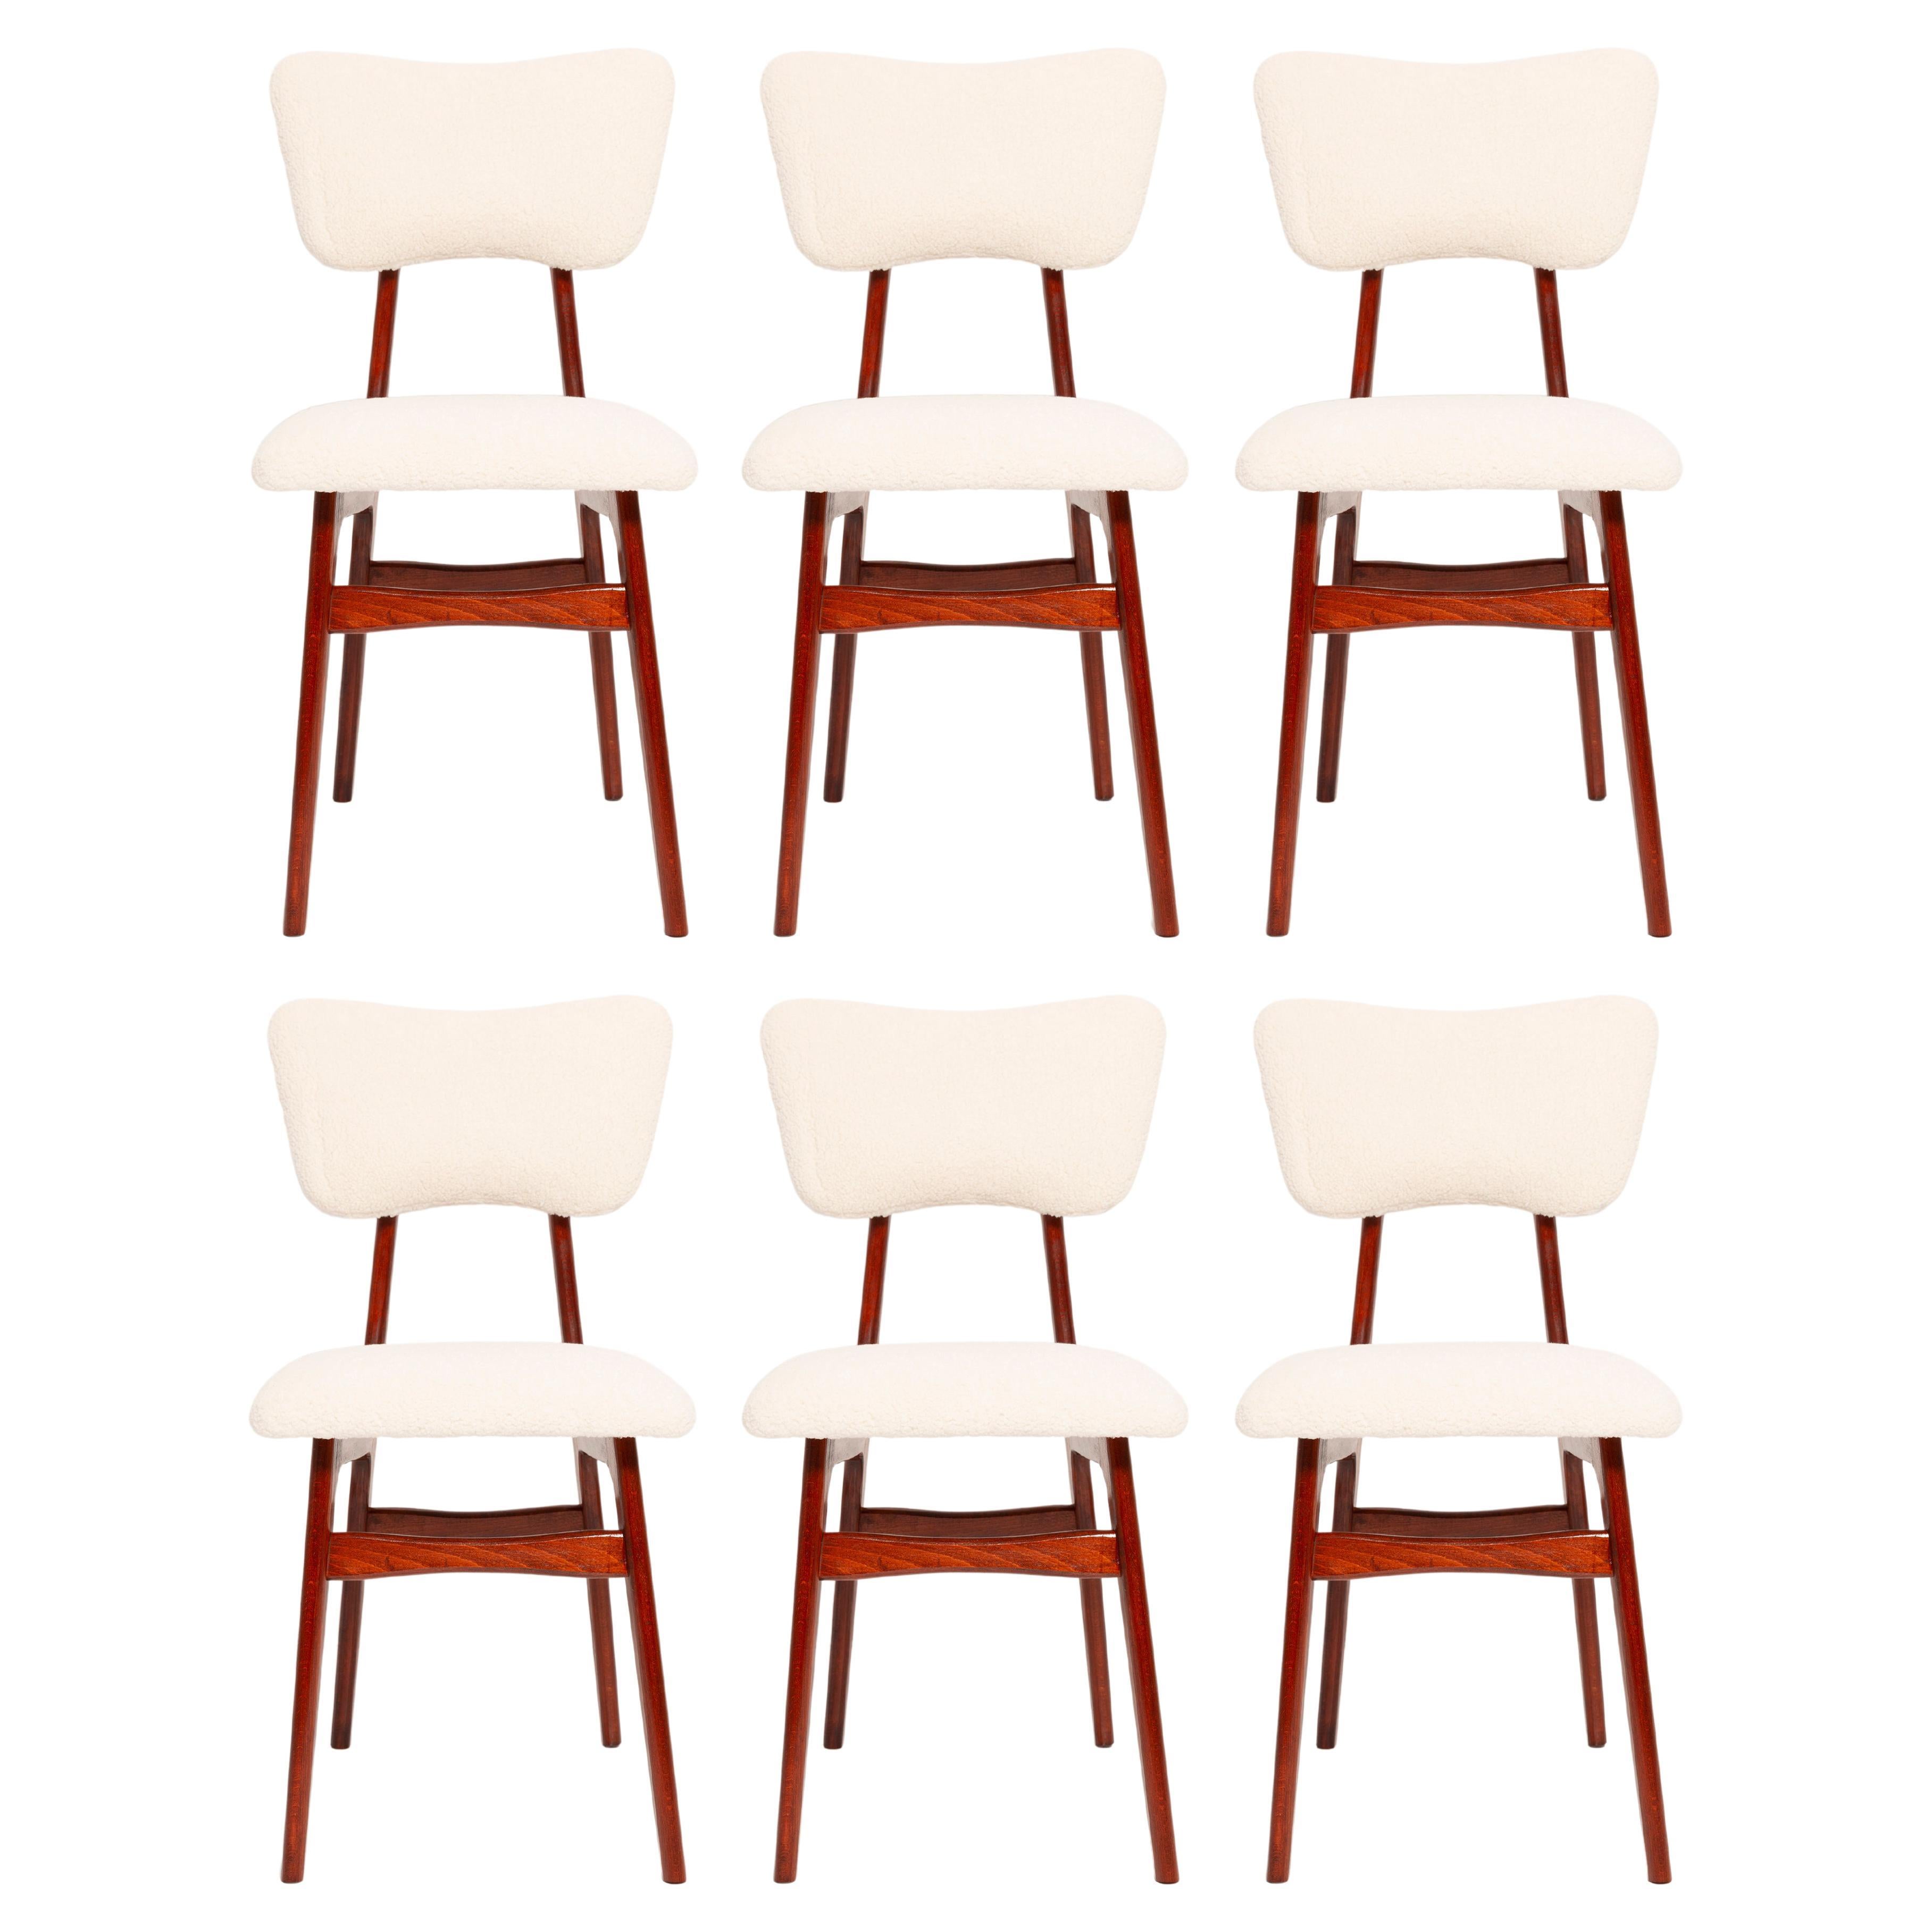 Six Light Cream Boucle 'Butterfly' Chairs, Europe, 1960s For Sale